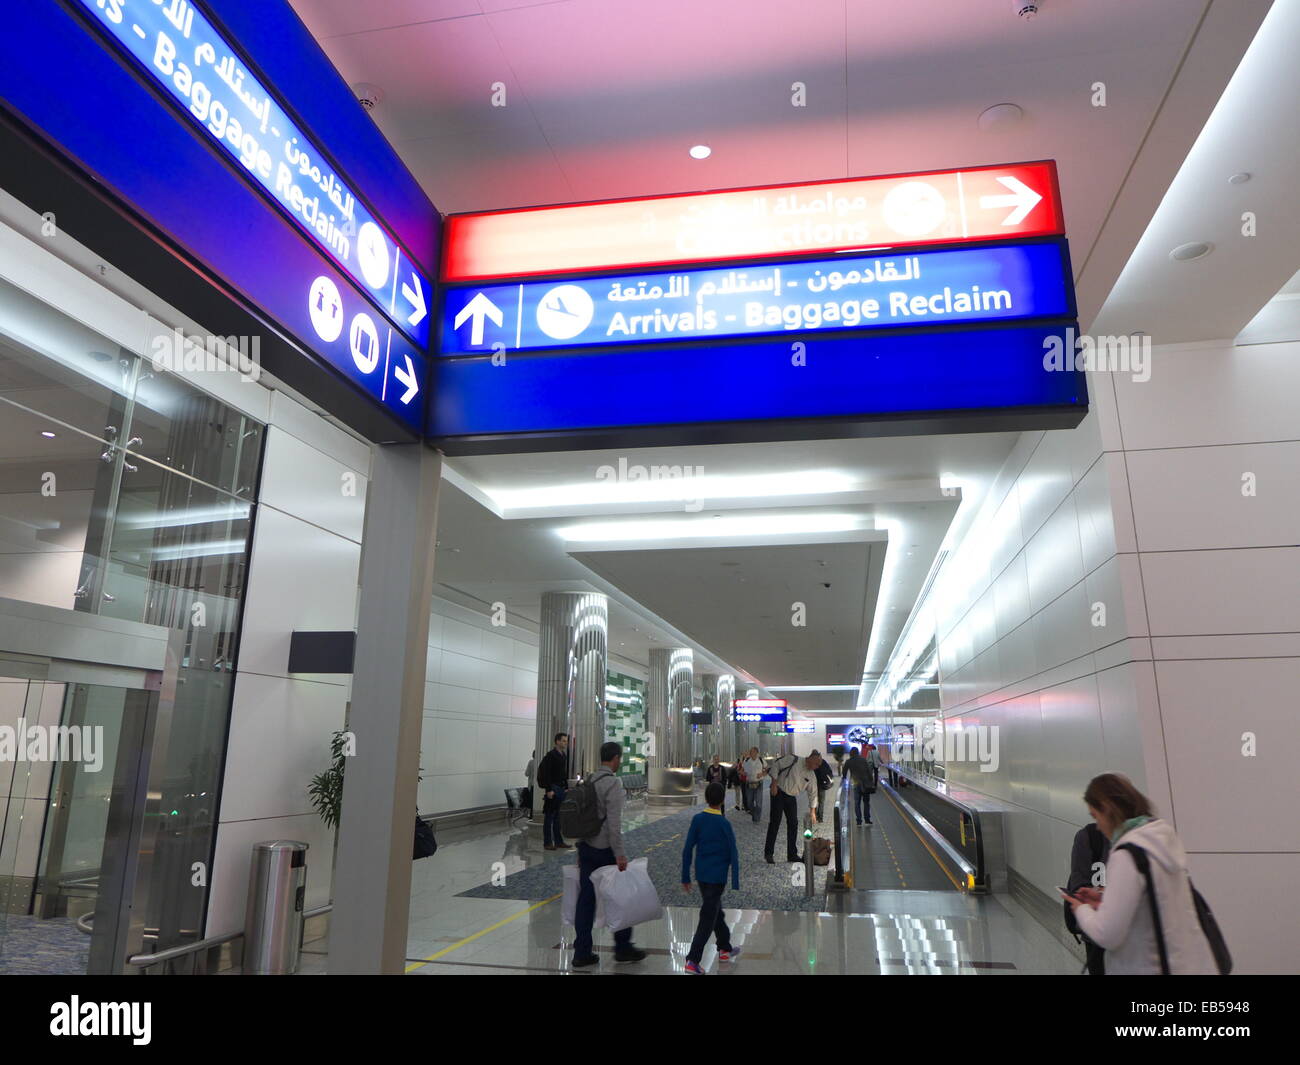 Sea See you Want UAE Dubai International Airport arrival departure signs and directions  Stock Photo - Alamy